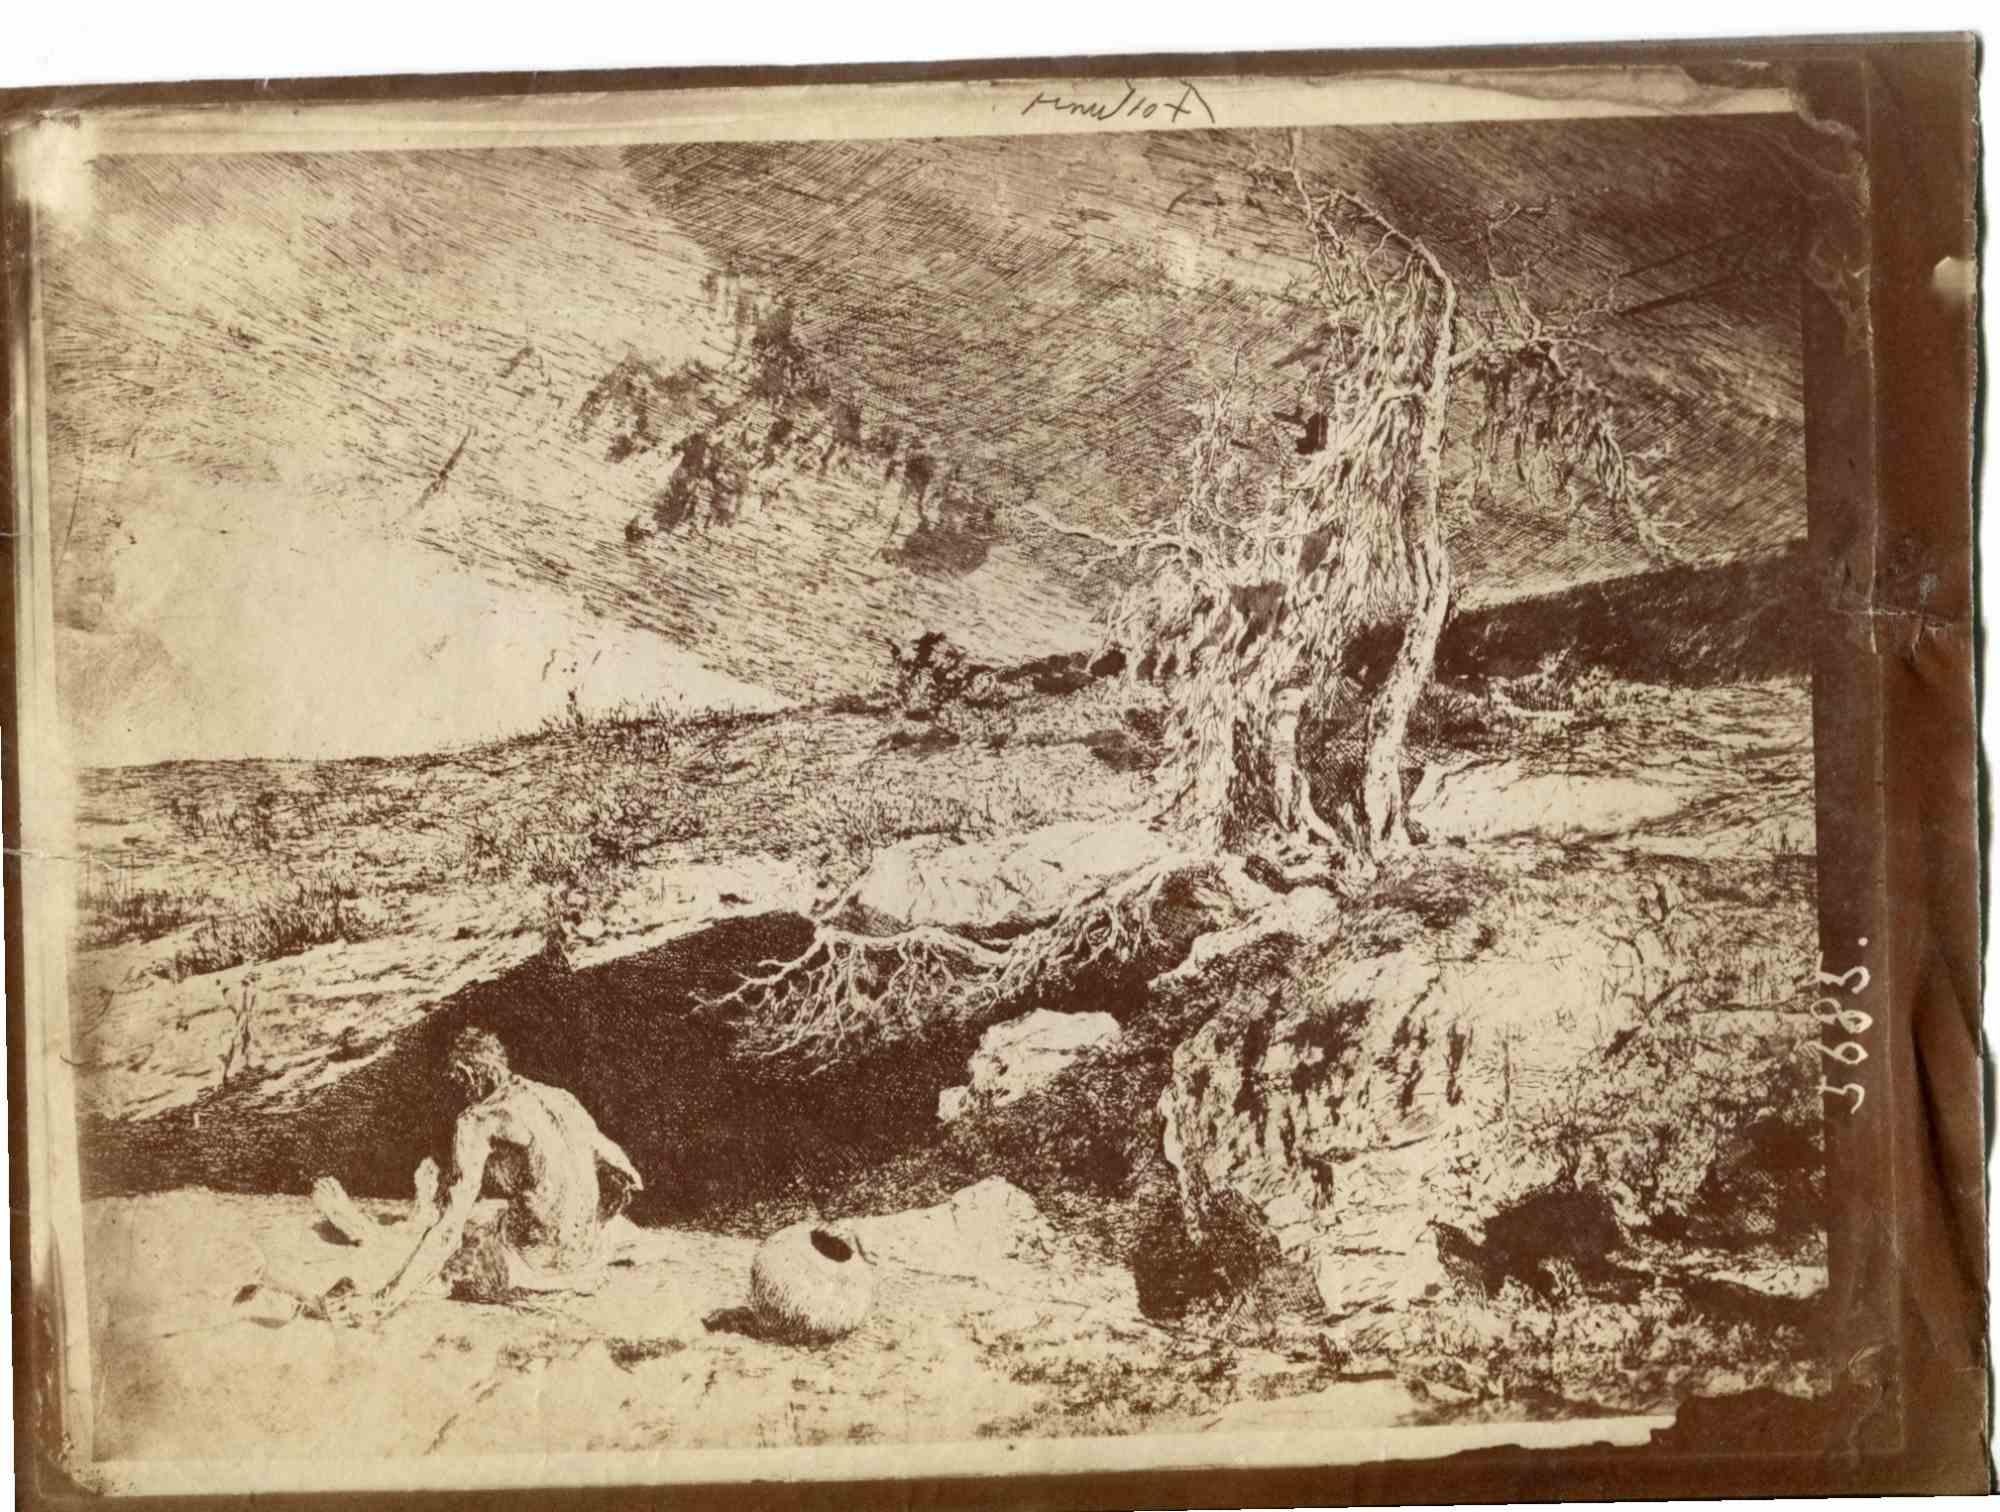 Unknown Figurative Photograph - Landscape - Vintage Photo - Early 20th Century